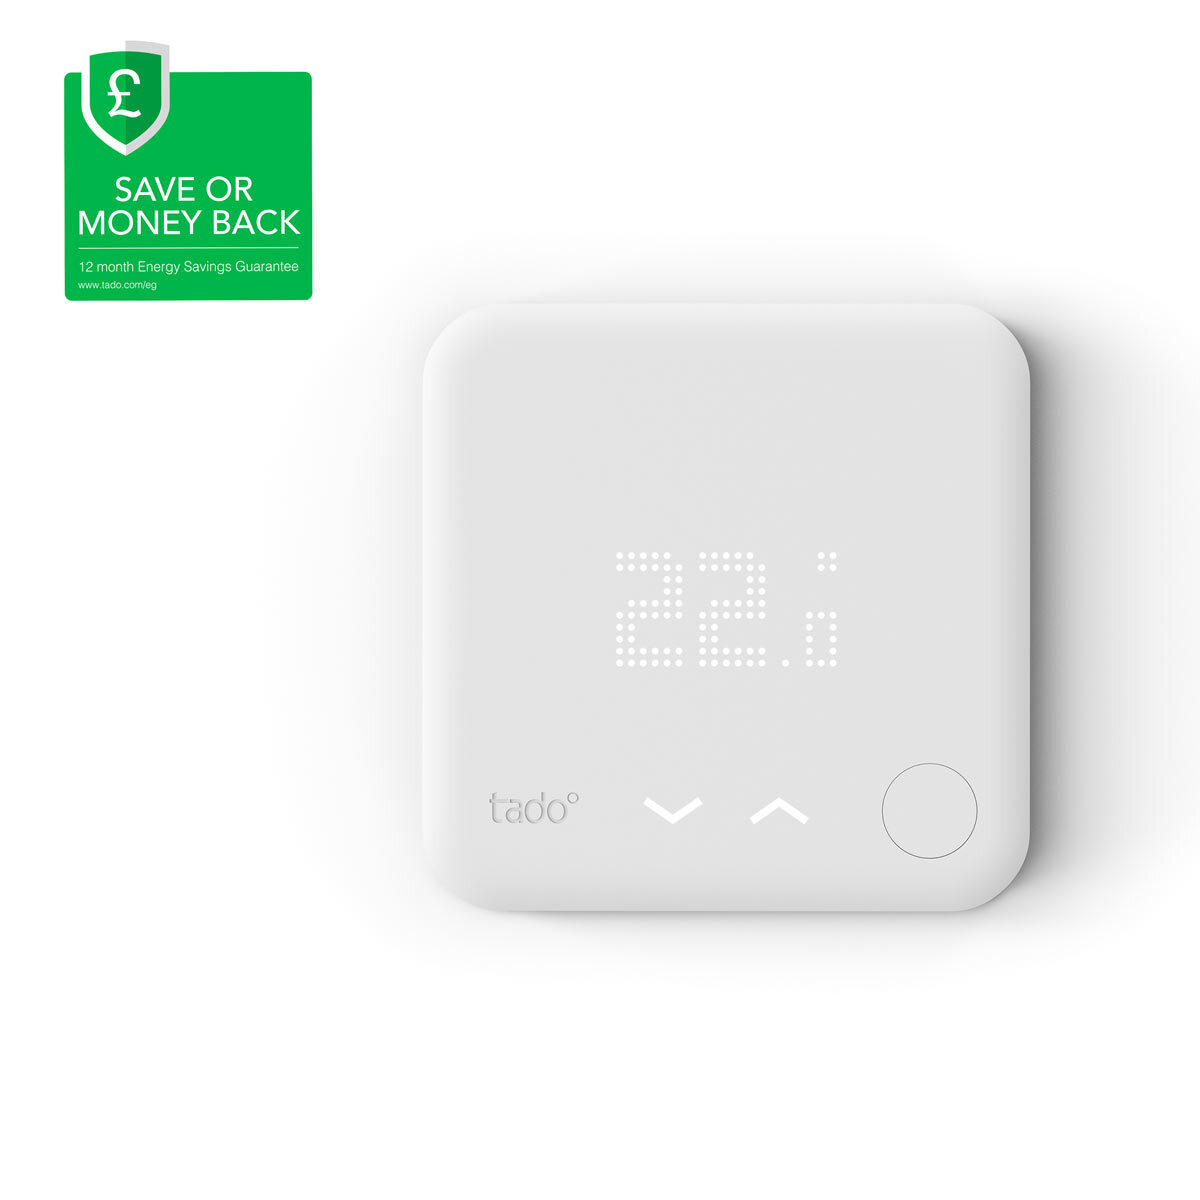 Cut out image of smart thermostat on white background